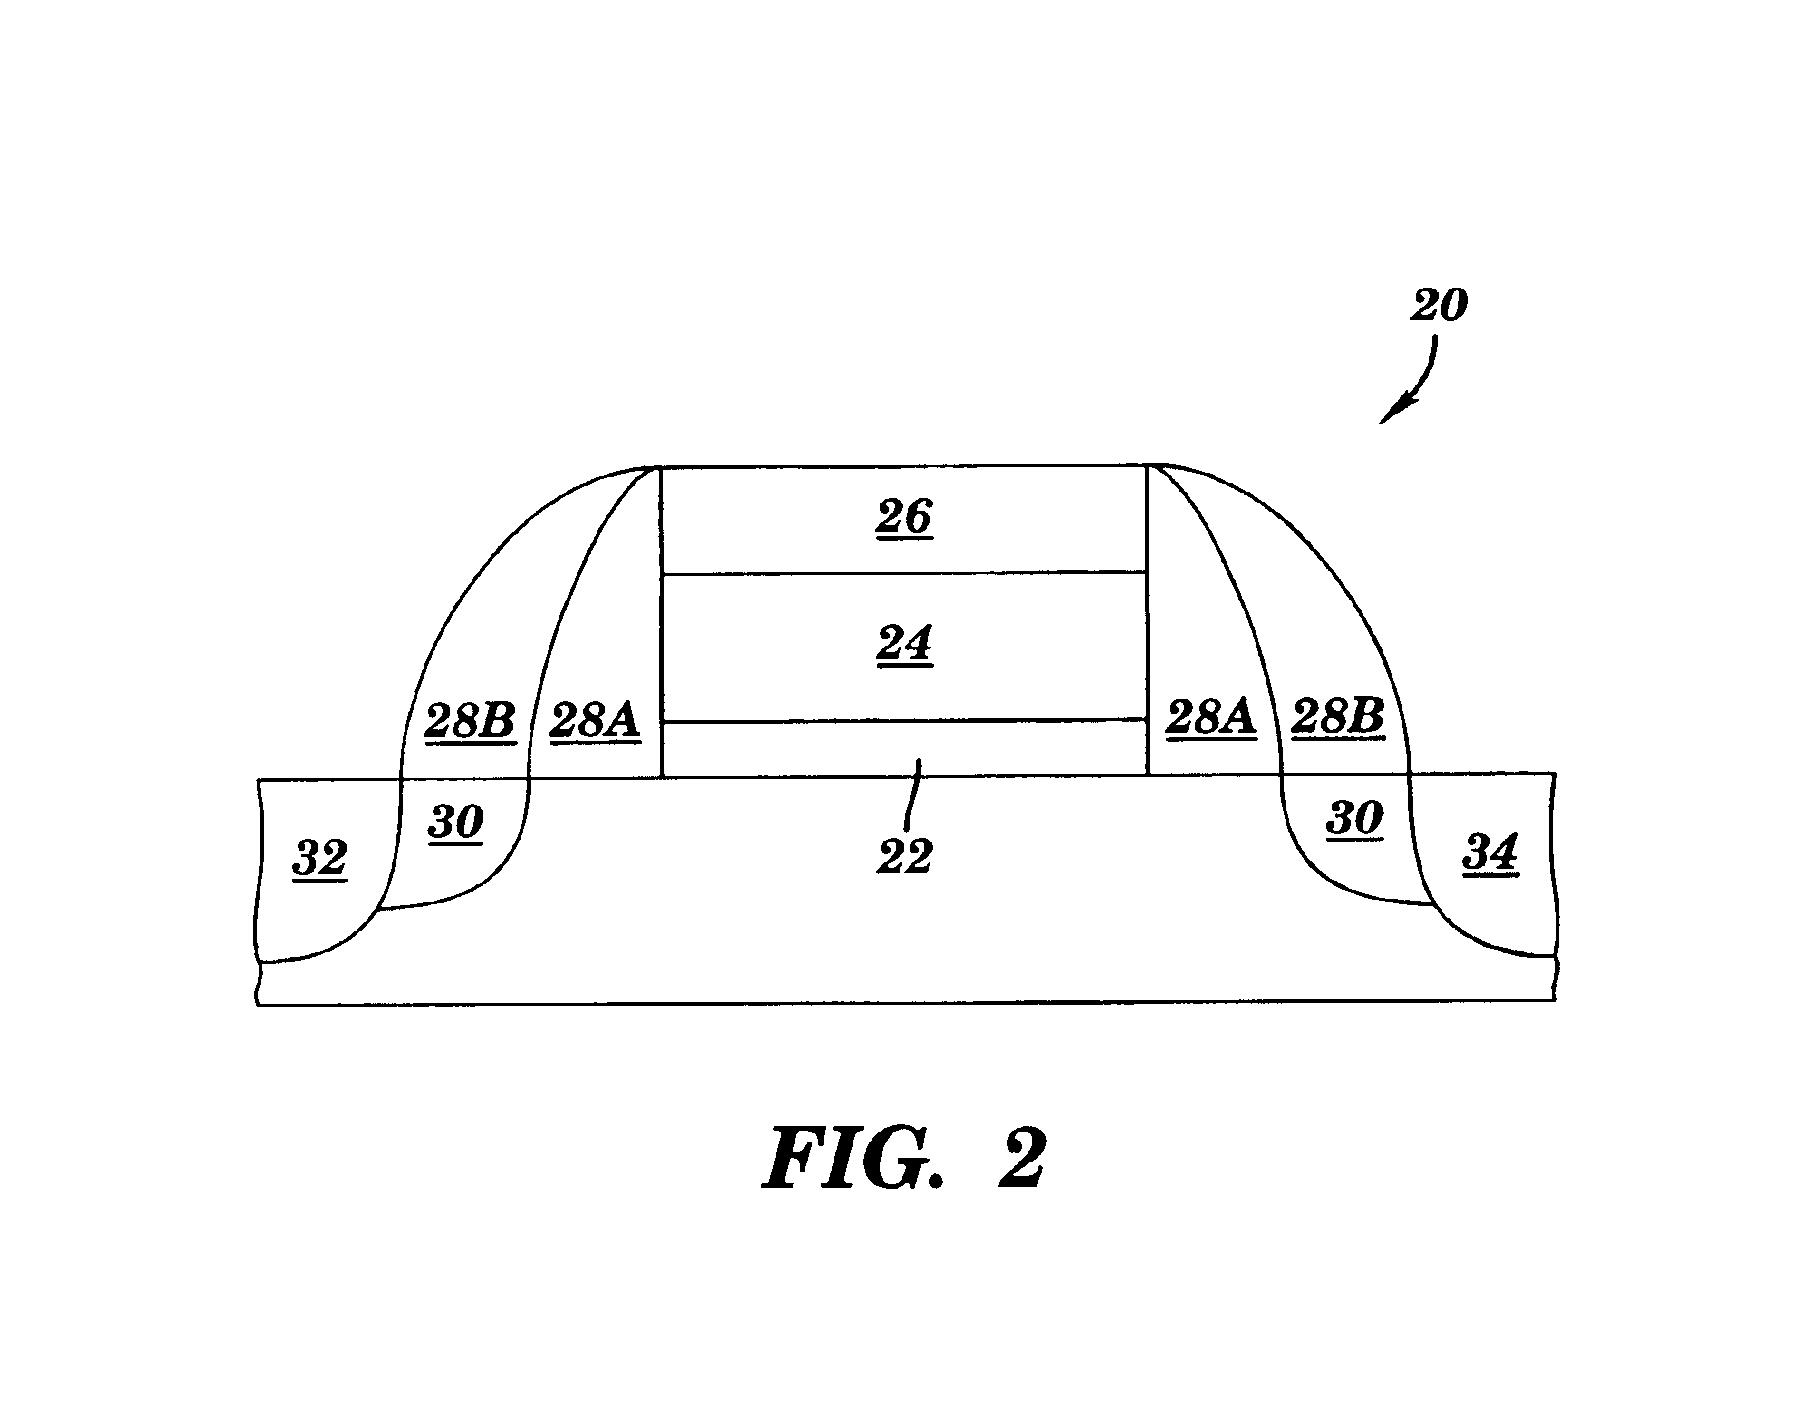 Method for forming an electronic device